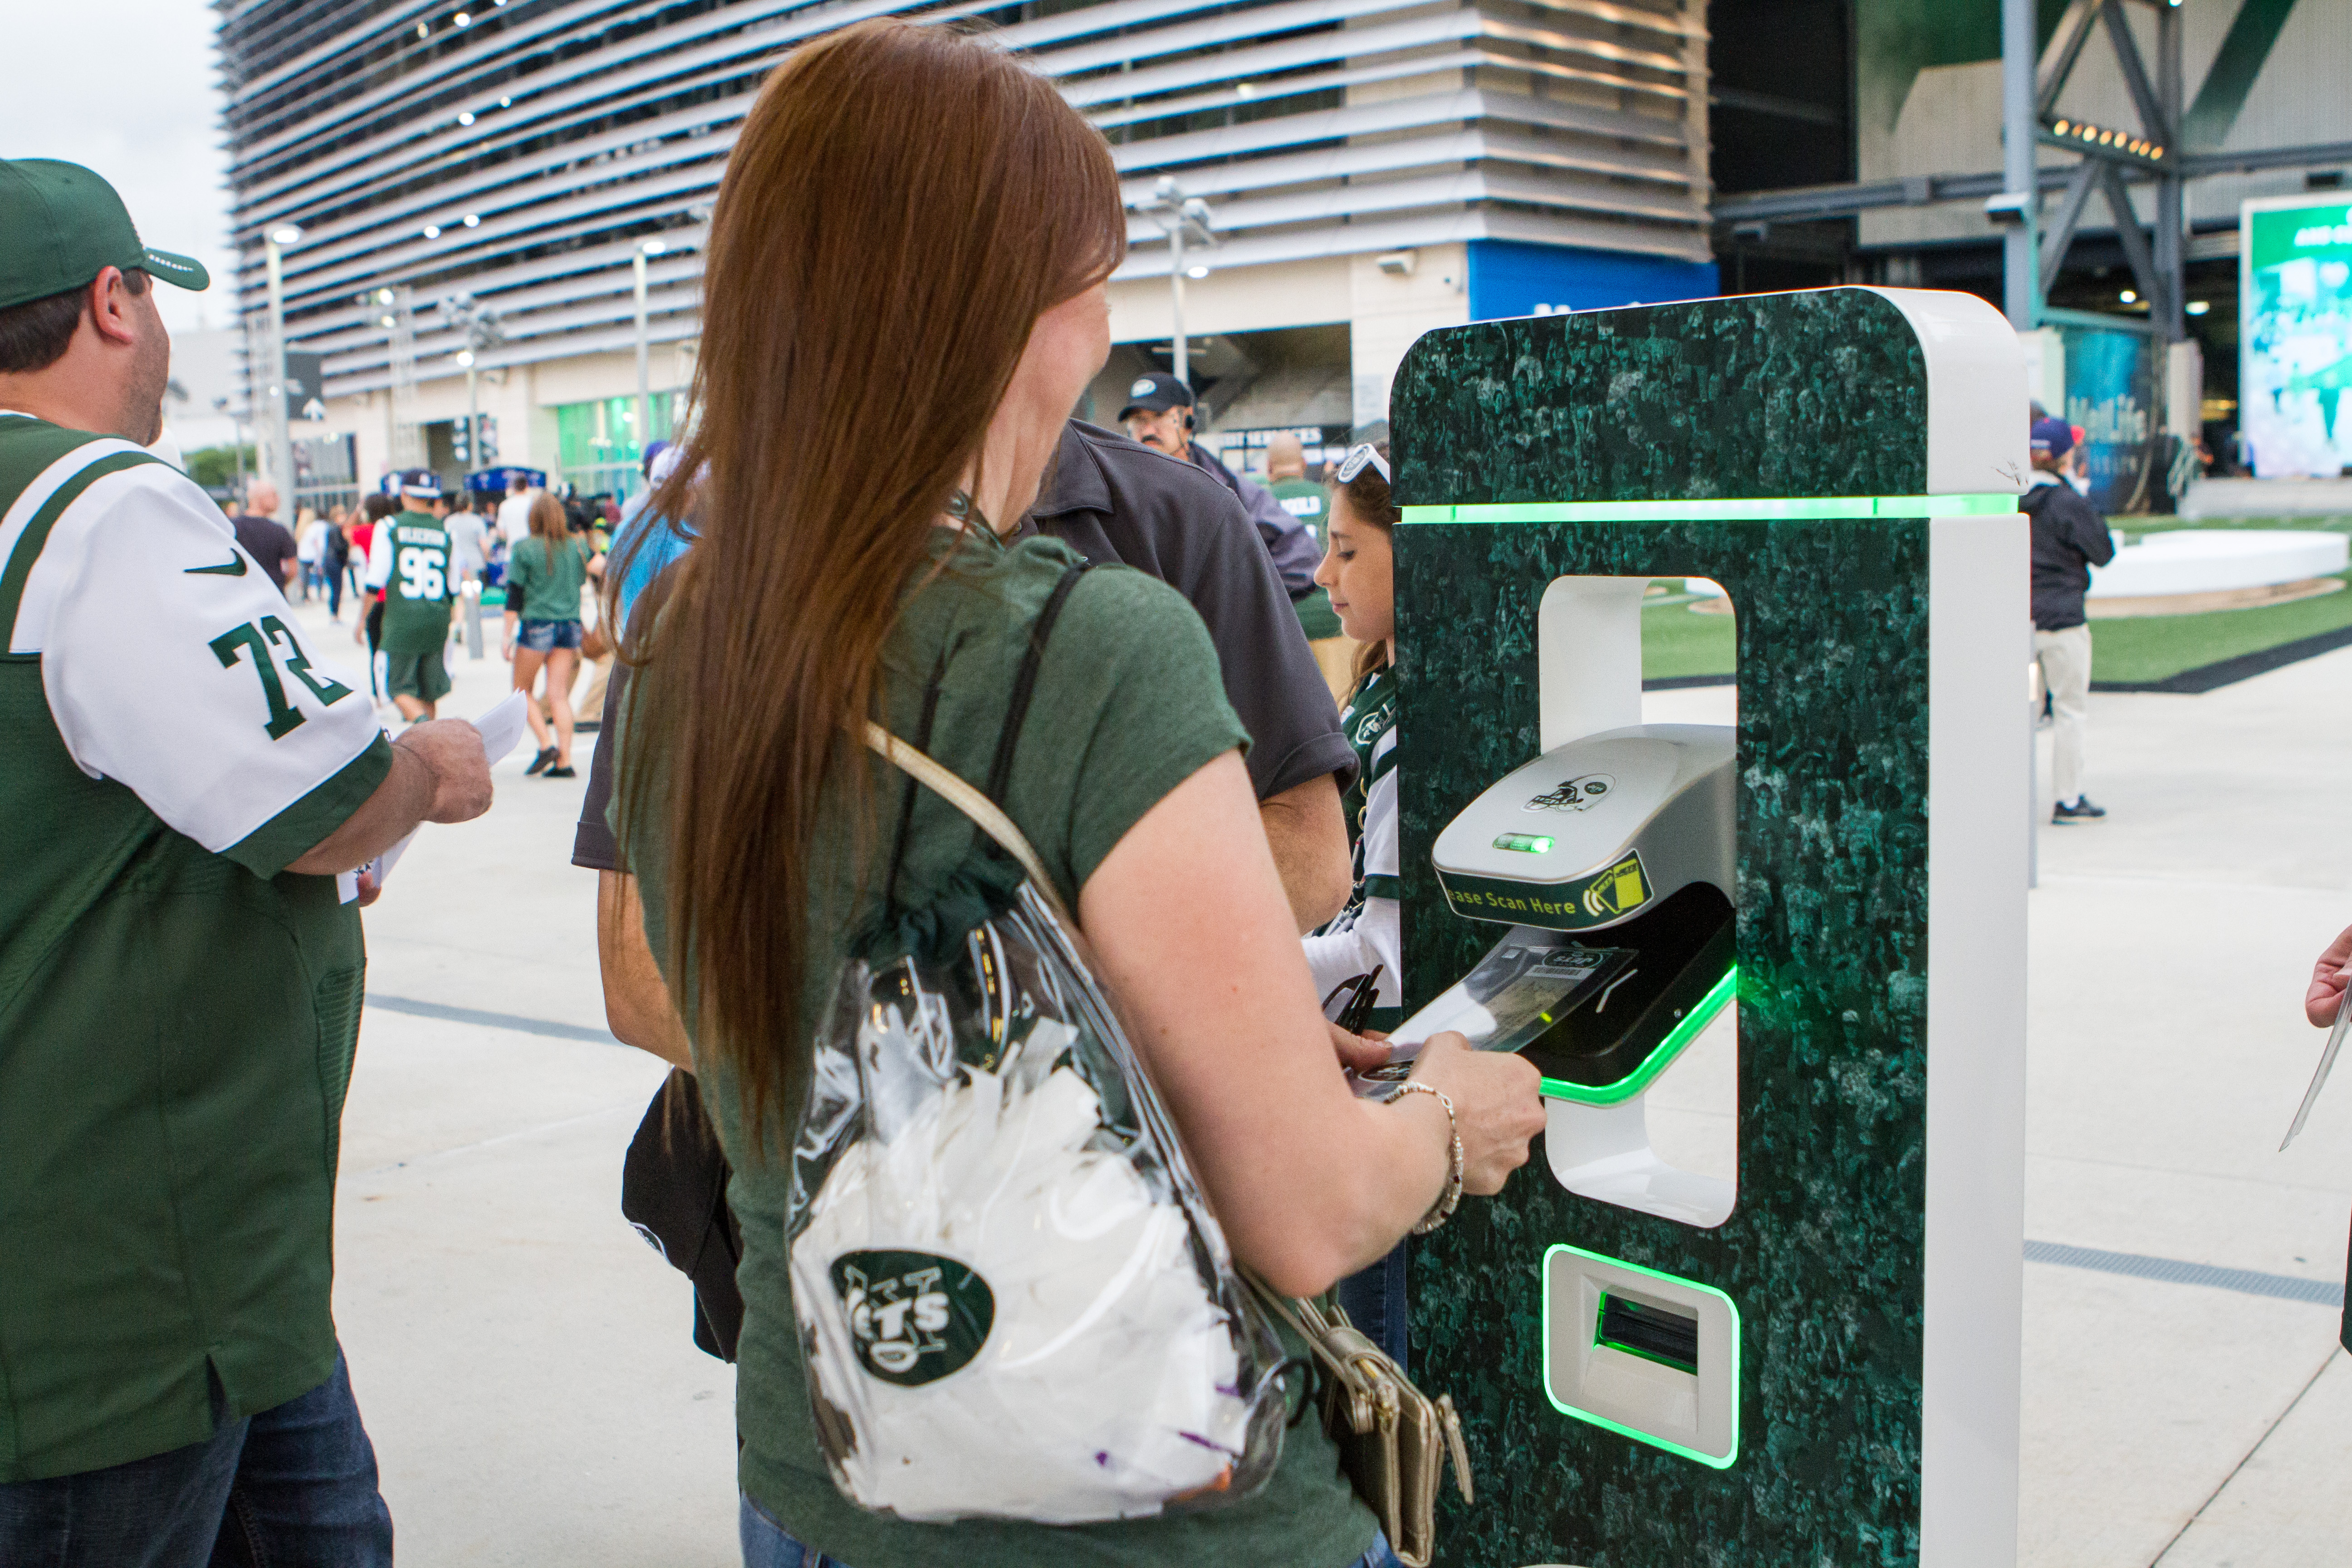 Checking in with a Jets Rewards card.